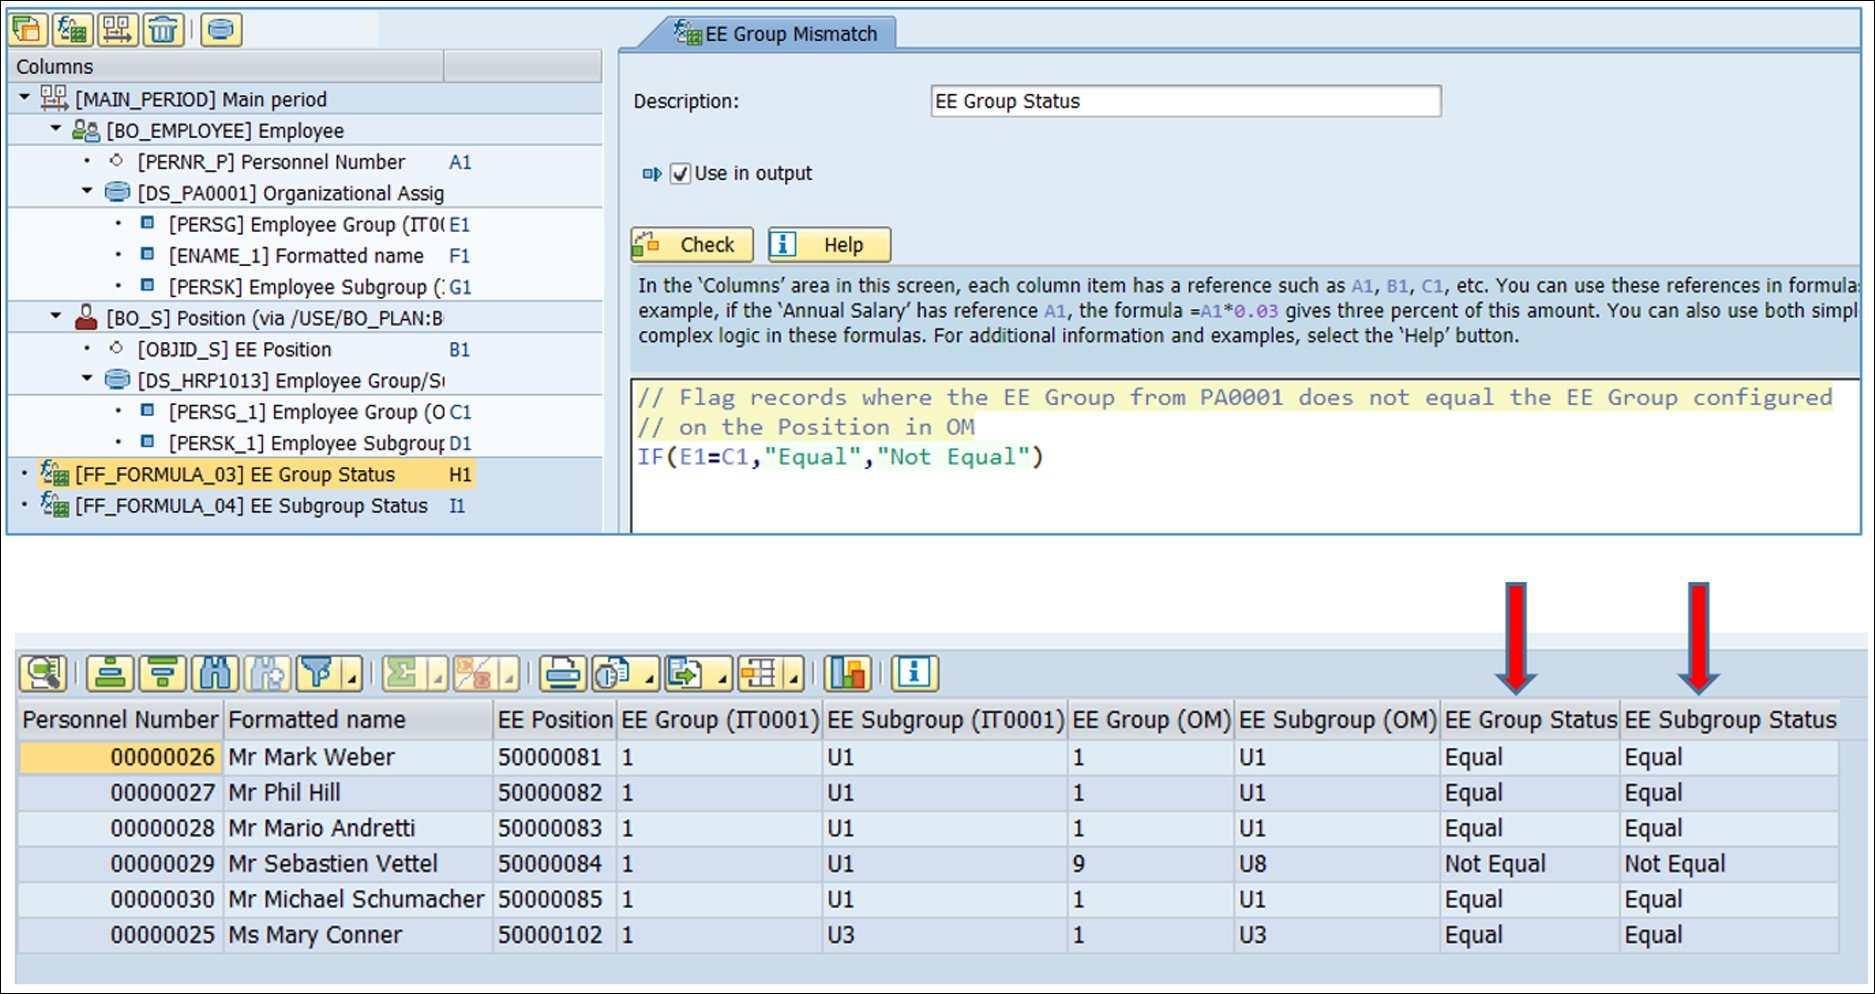 This formula will highlight when two fields from different parts of SAP do not equal each other